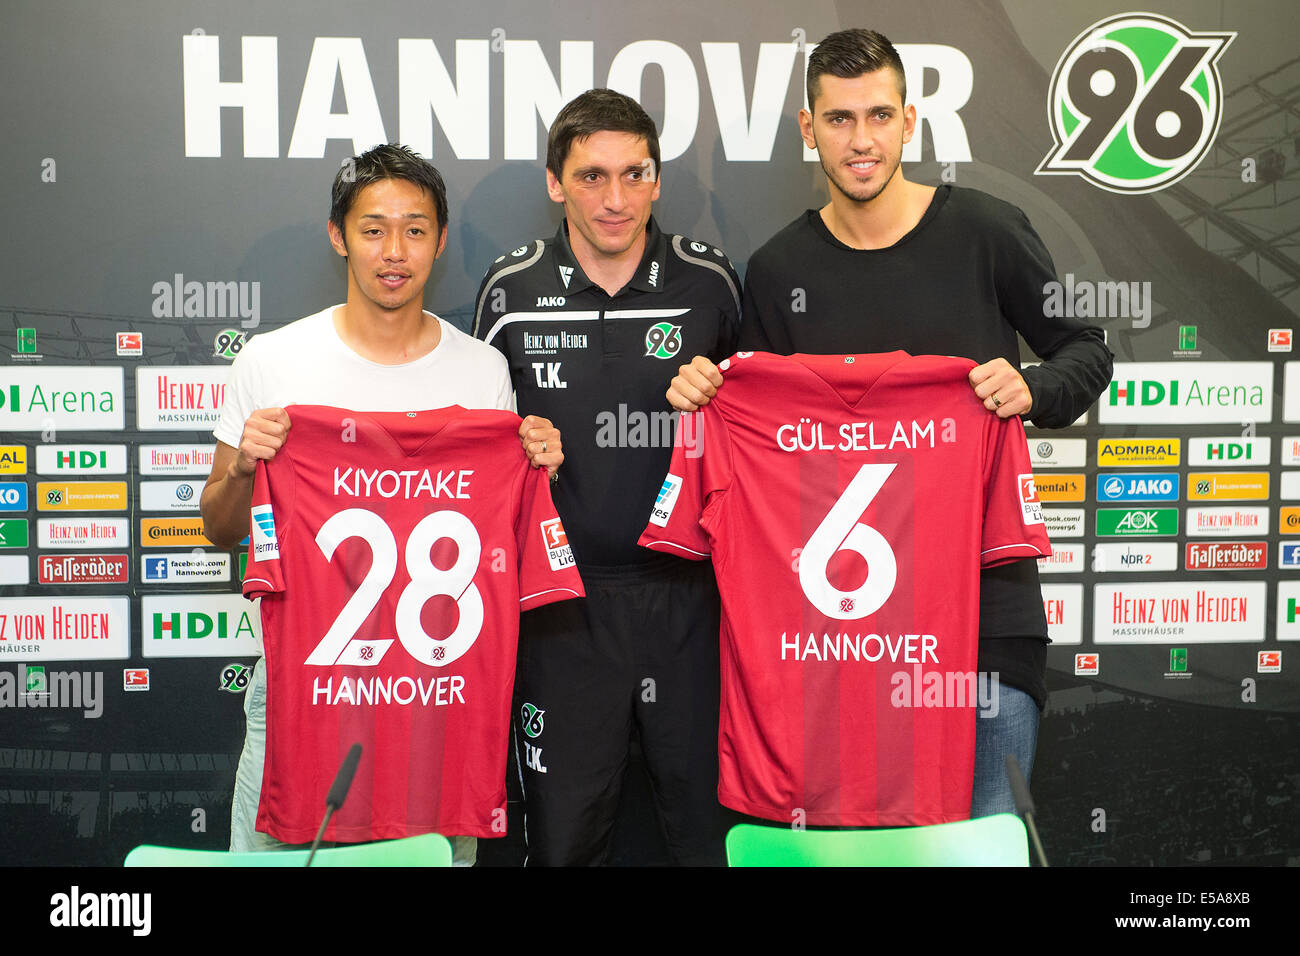 The new player from Hanover 96 Hiroshi Kiyotake (L) and Ceyhun Gulselam (R) as well as head coach Tayfun Korkut stand during a press conference at HDI Arena in Hanover, Germany, 25 July 2014. Photo: NIGEL TREBLIN/dpa Stock Photo